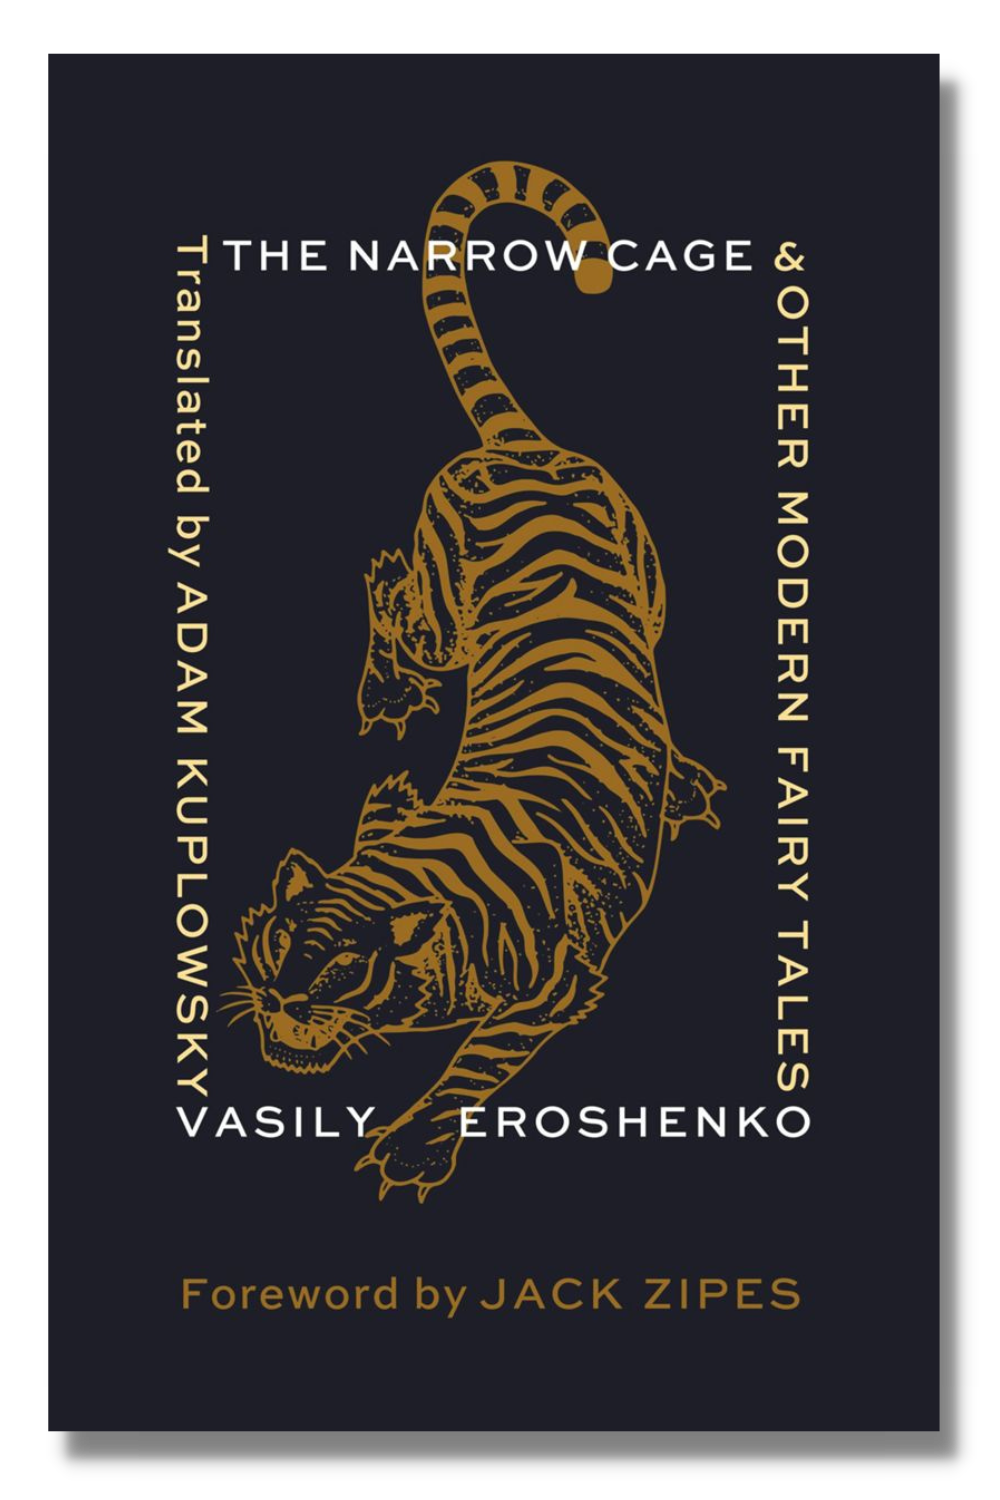 The cover of "The Narrow Cage and Other Modern Fairy Tales"